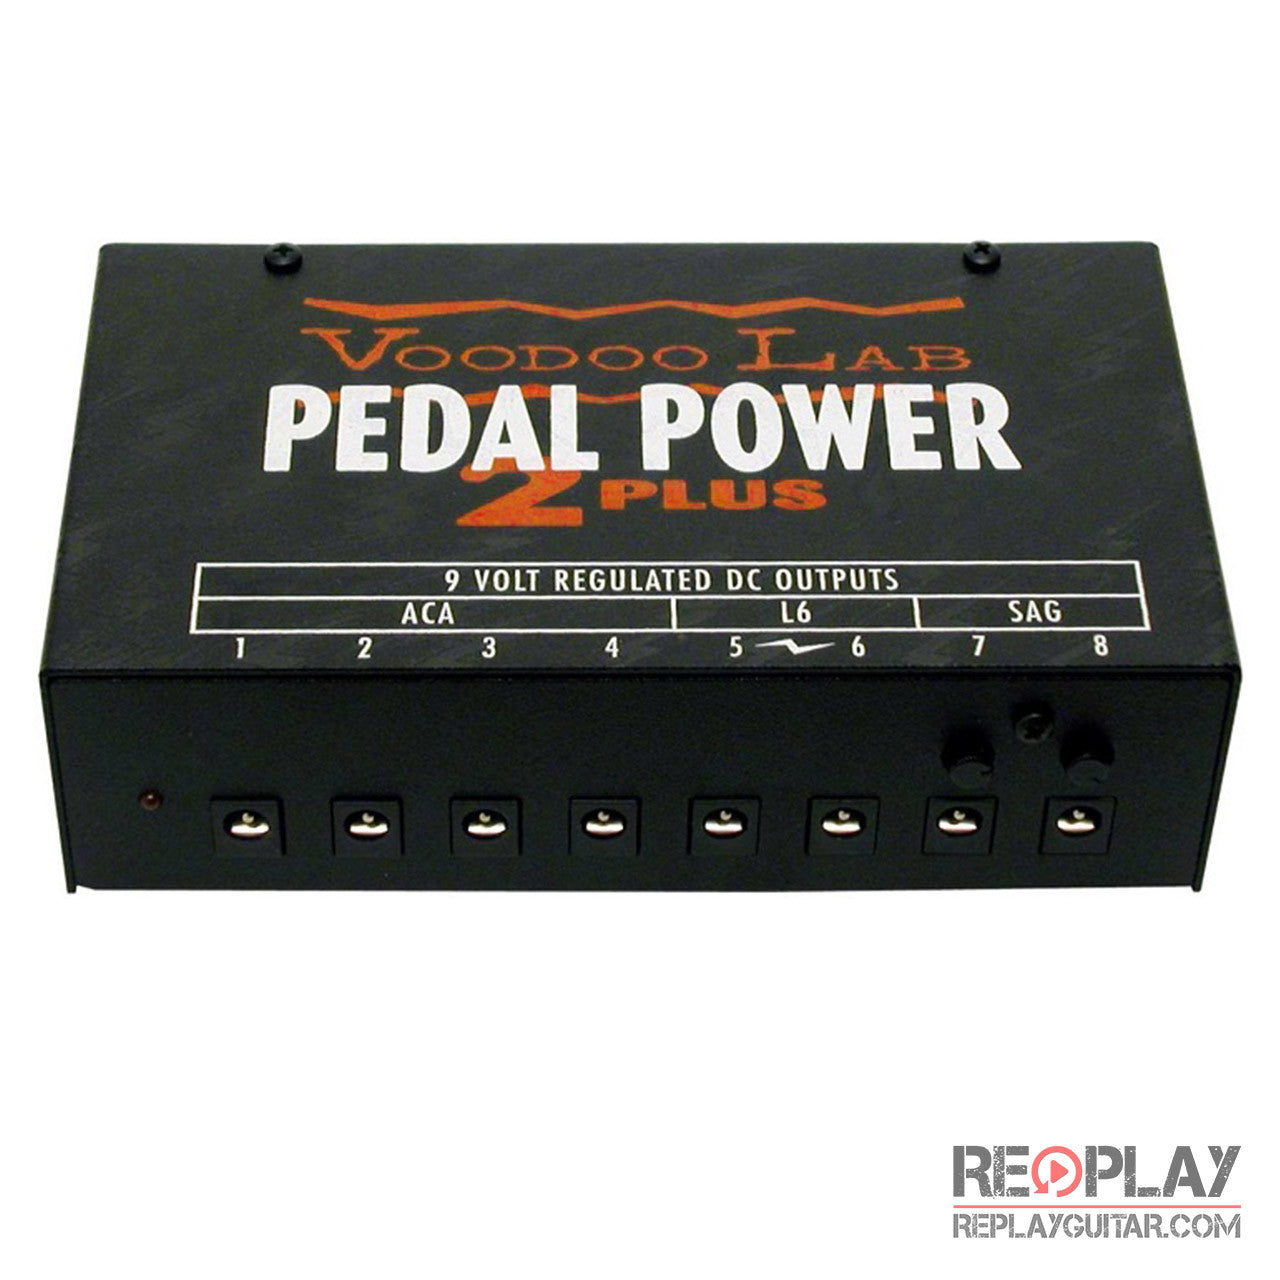 Voodoo Lab Pedal Power 2 Plus | For Sale | Replay Guitar Exchange